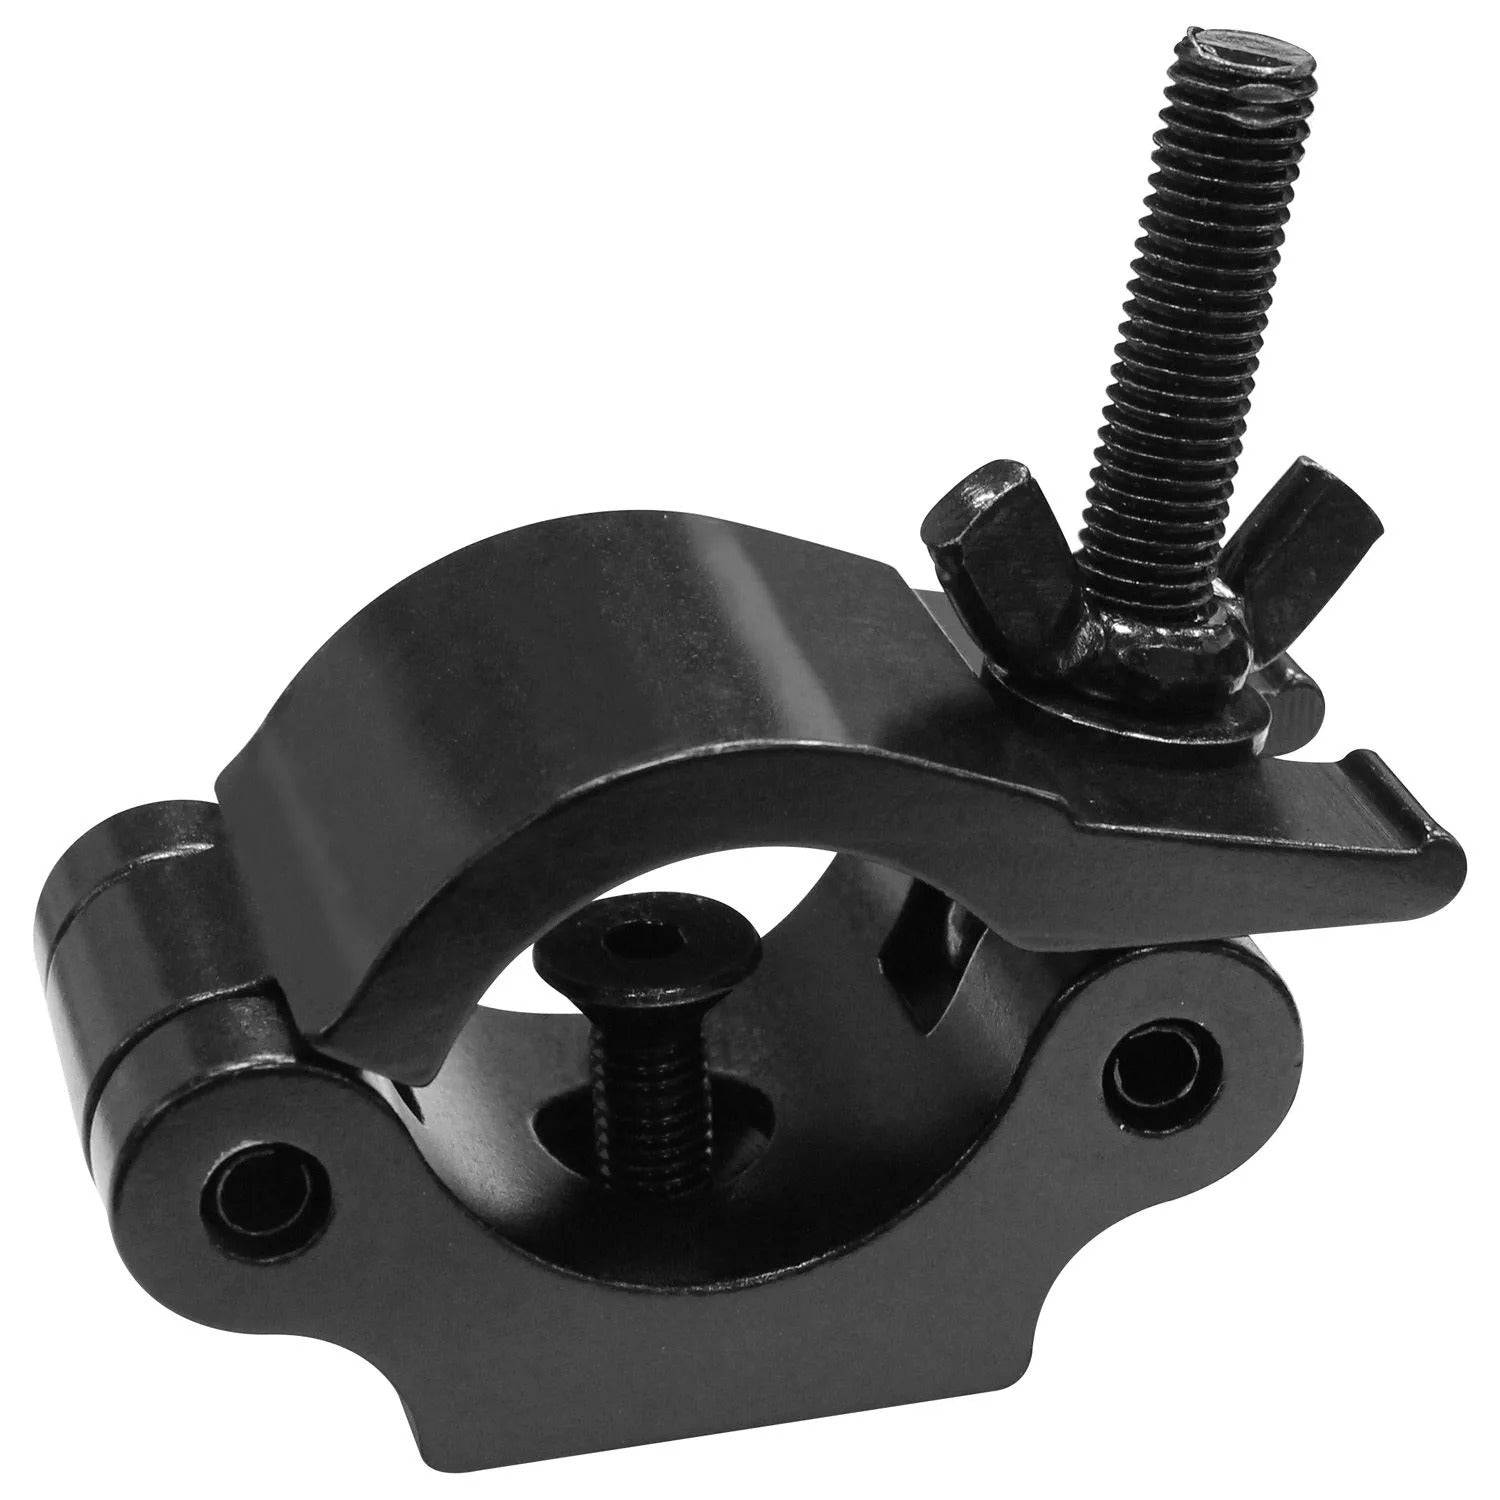 Odyssey LACP50RB, Aluminum Pro Wide Clamp In Black With A Round Neck Countersunk Bolt - Hollywood DJ